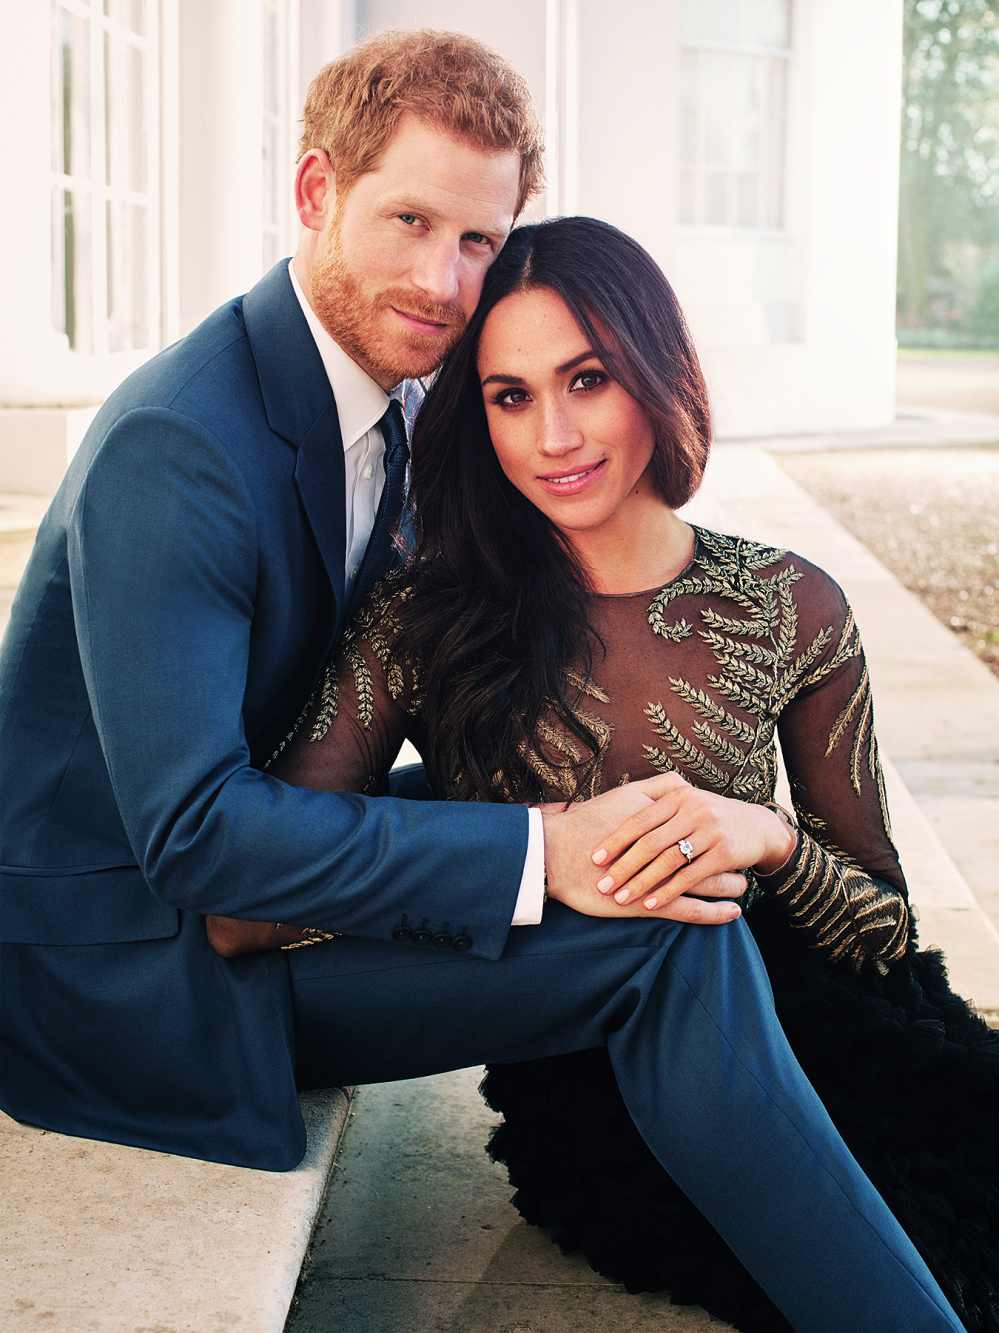 What is the significance of Prince Harry and Meghan Markle's